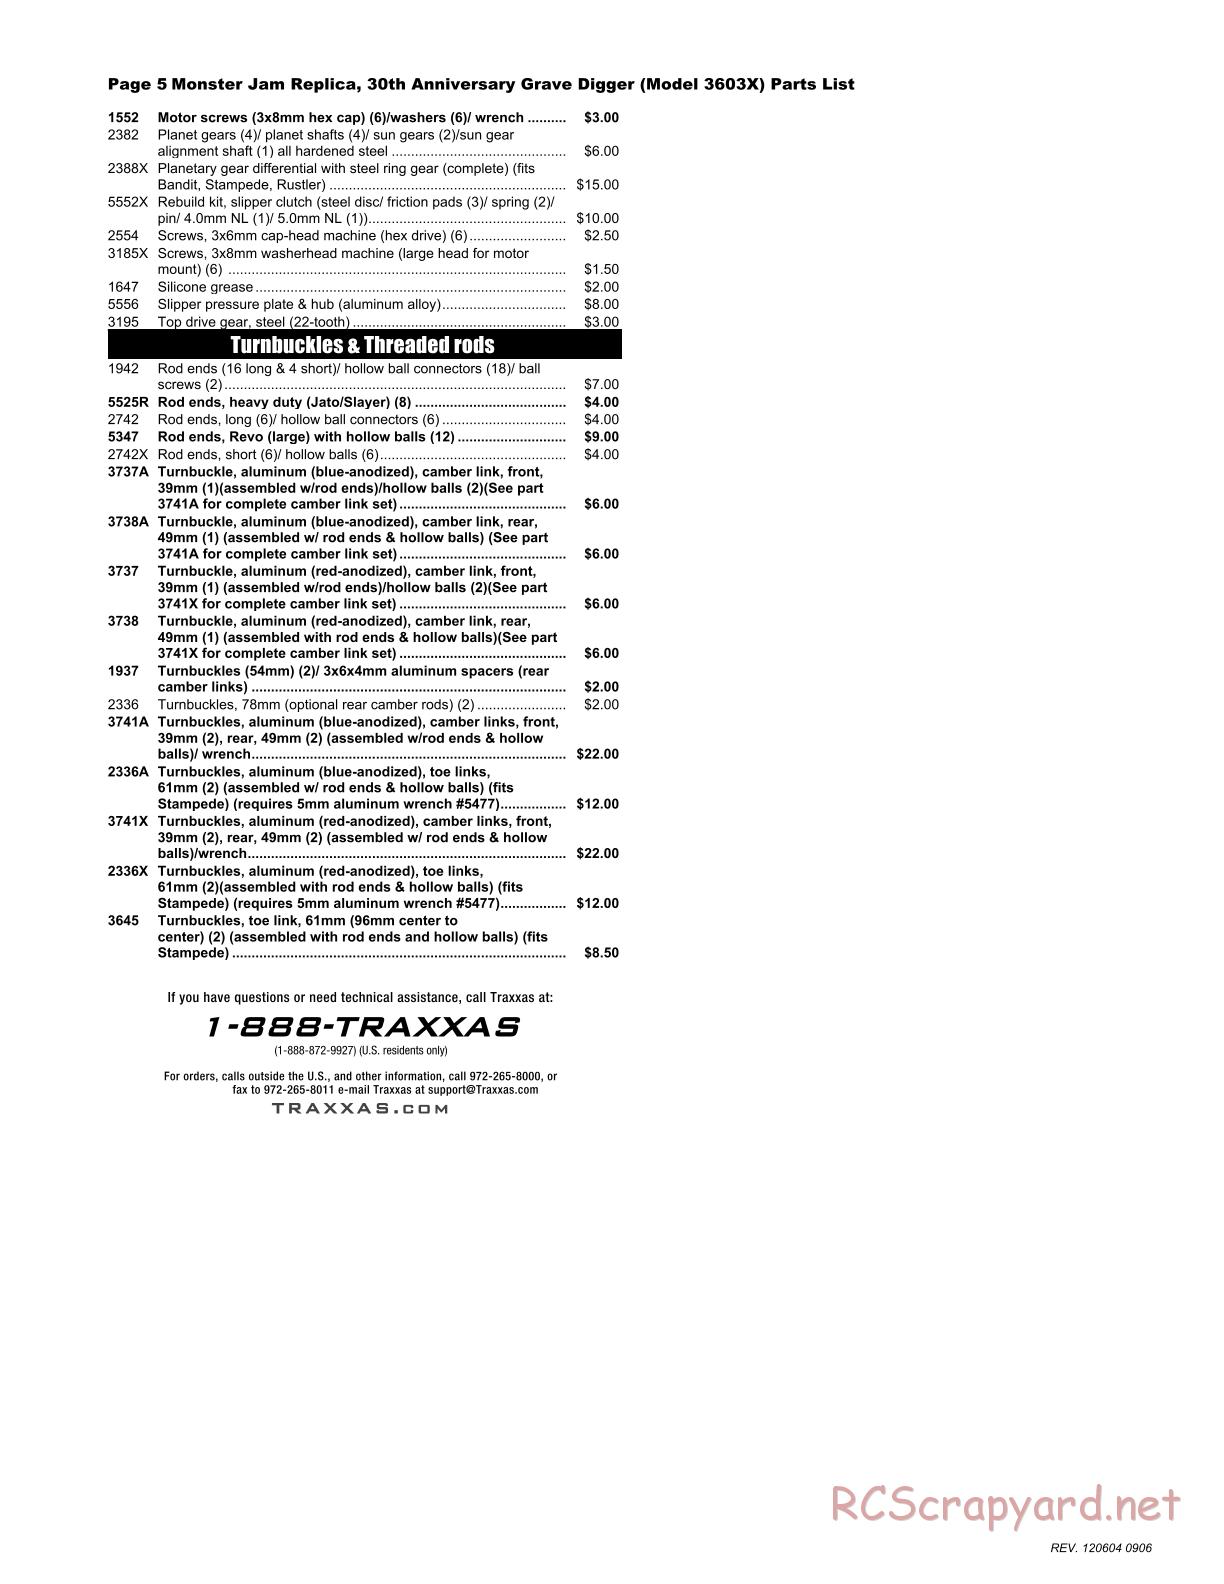 Traxxas - Monster Jam - Grave Digger 30th Anniversary Special - Parts List - Page 5